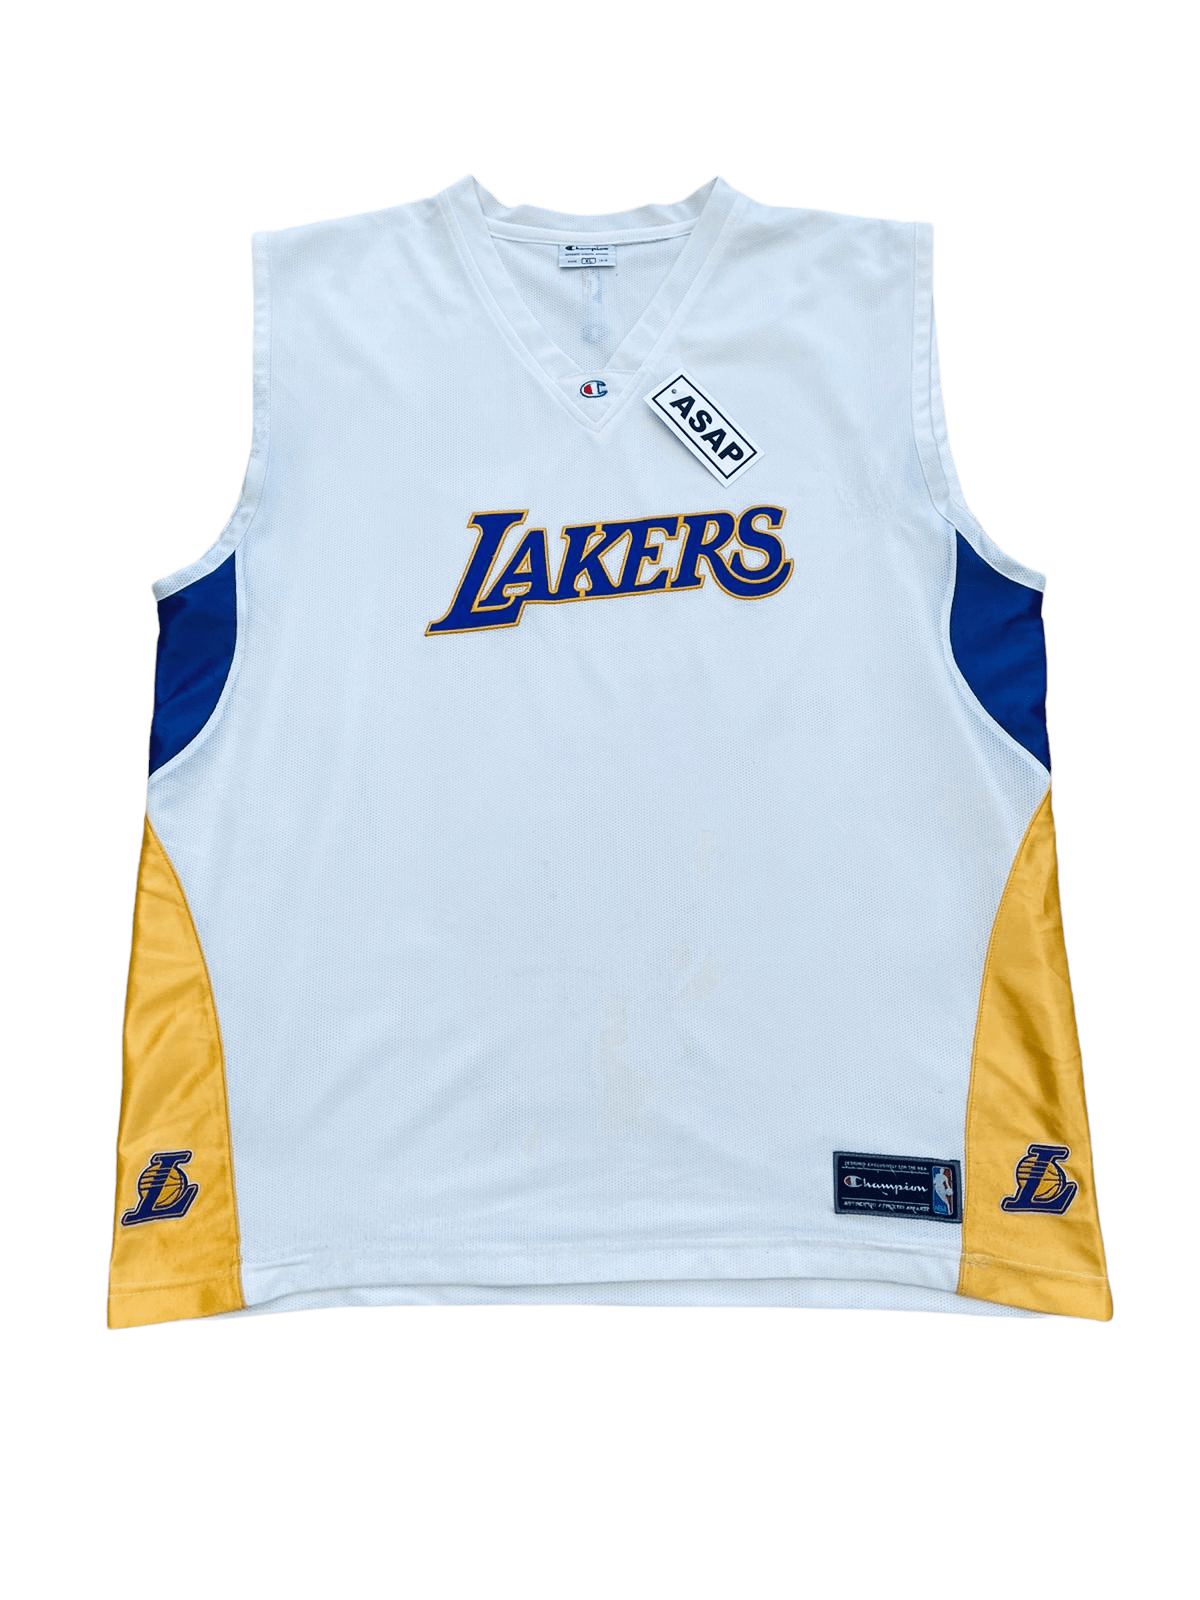 2001-04 AUTHENTIC LA LAKERS NIKE WARM-UP JERSEY L - Classic